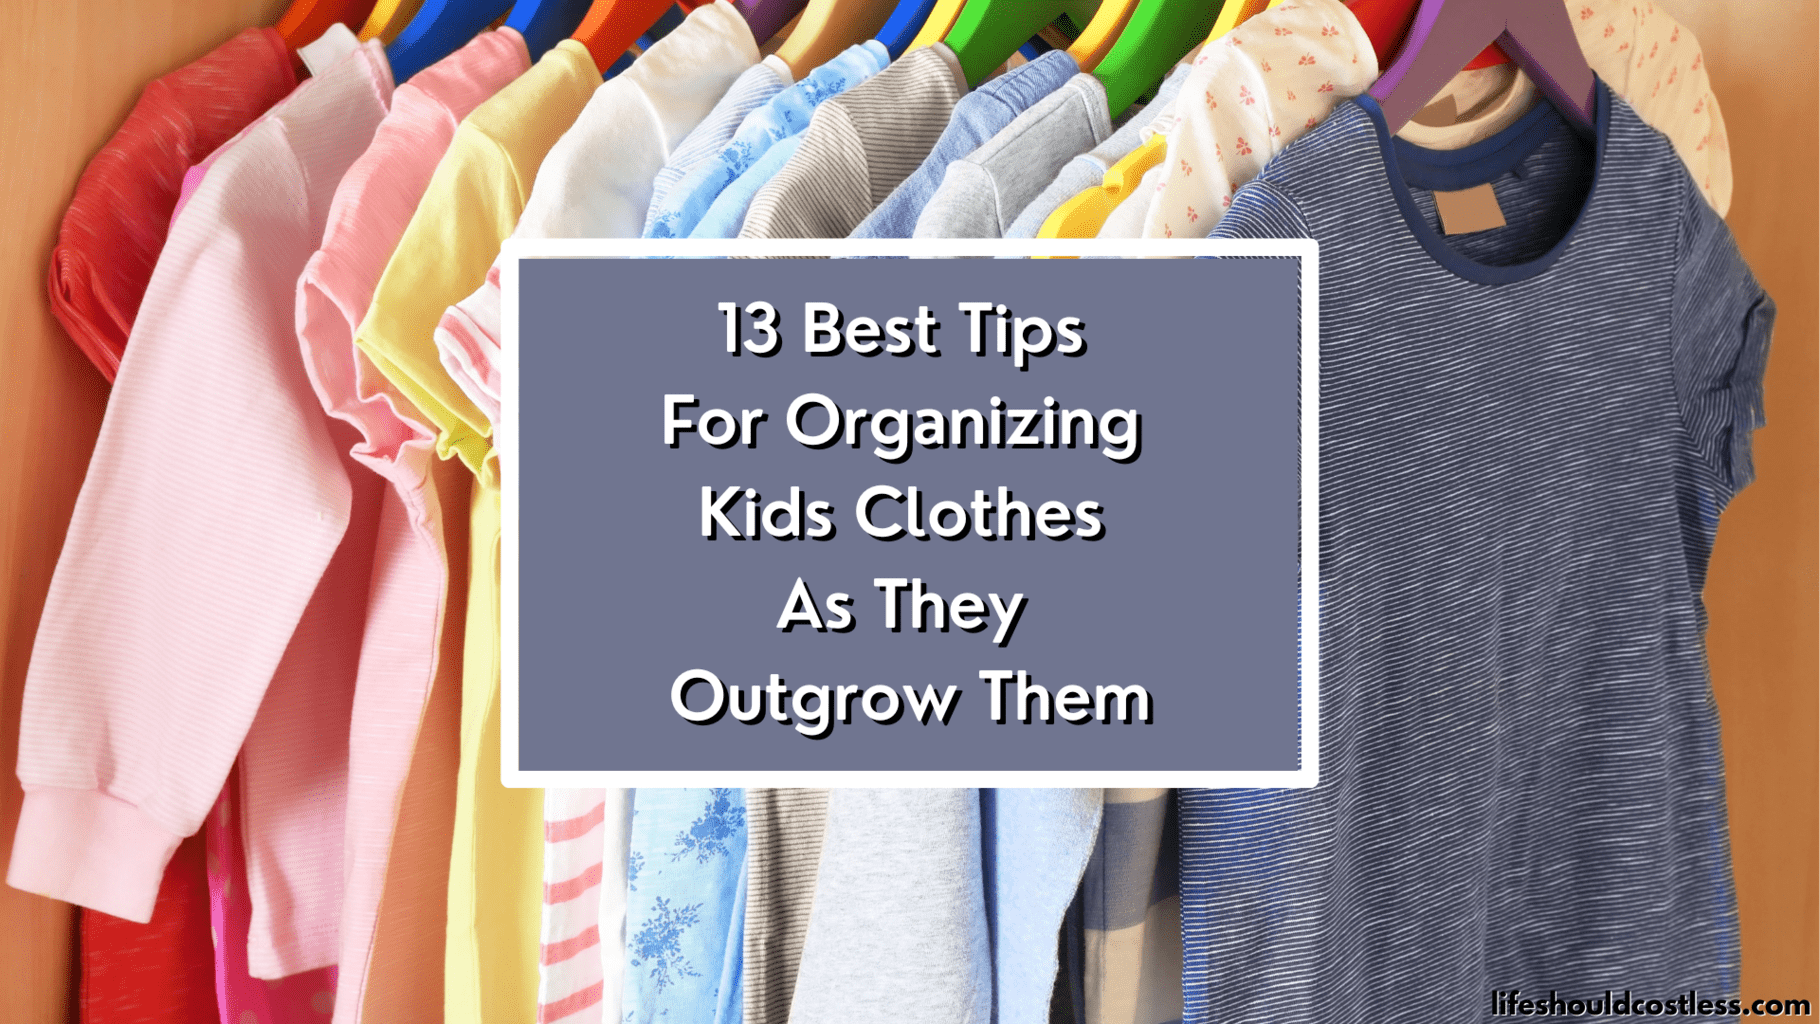 https://lifeshouldcostless.com/wp-content/uploads/2023/03/13-Best-Tips-For-Organizing-Kids-Clothes-As-They-Outgrow-Them.png